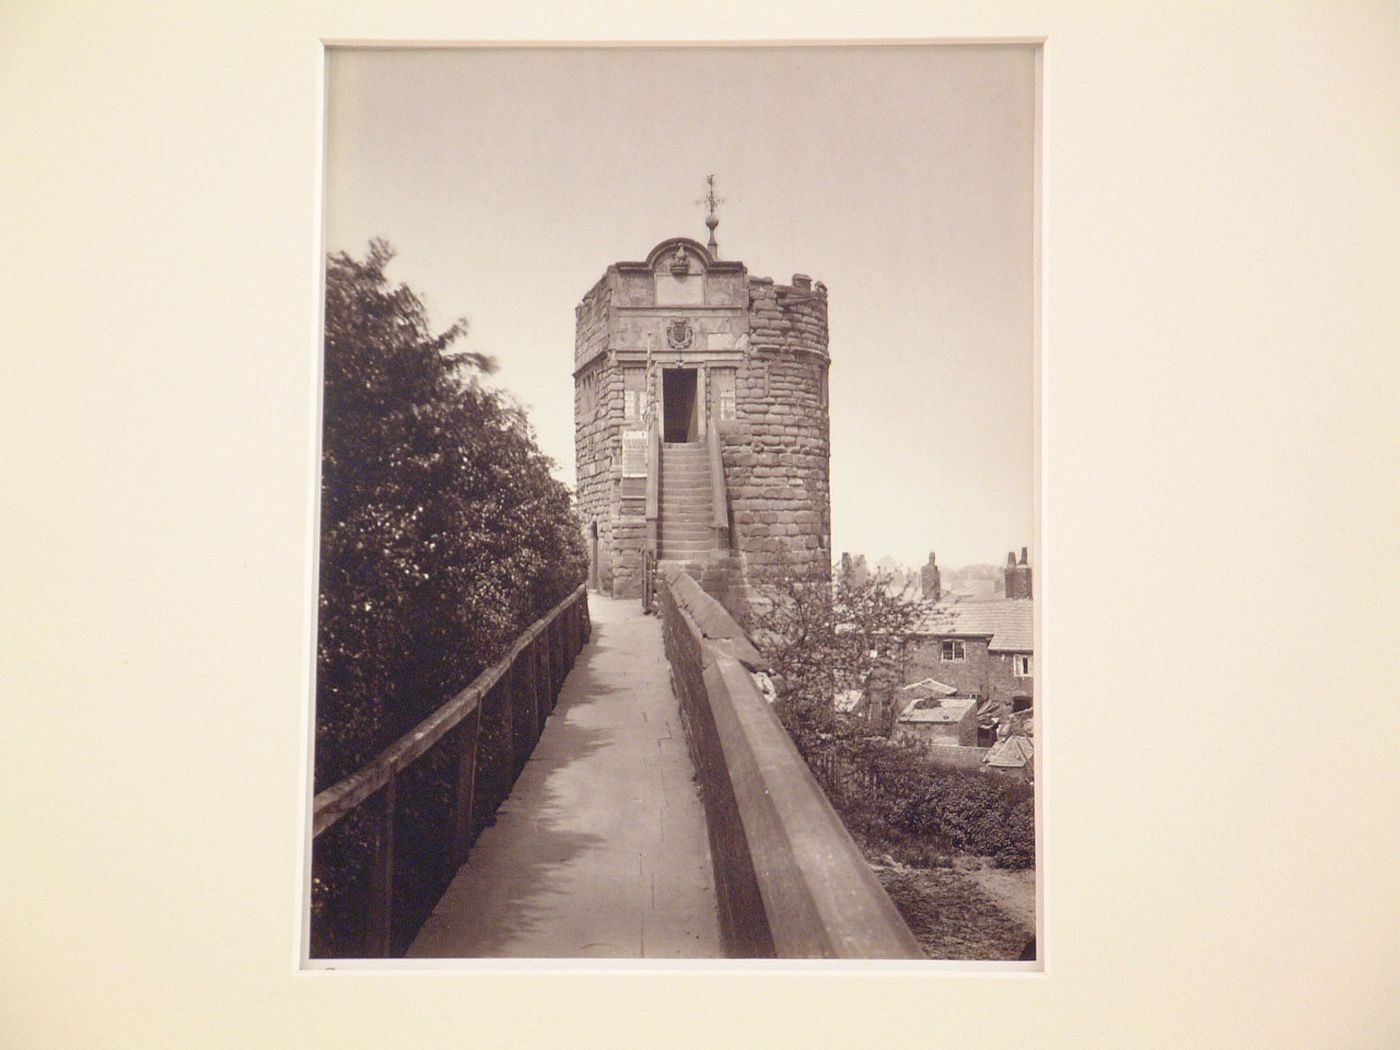 View of the Phoenix Tower from the wall, Chester, England